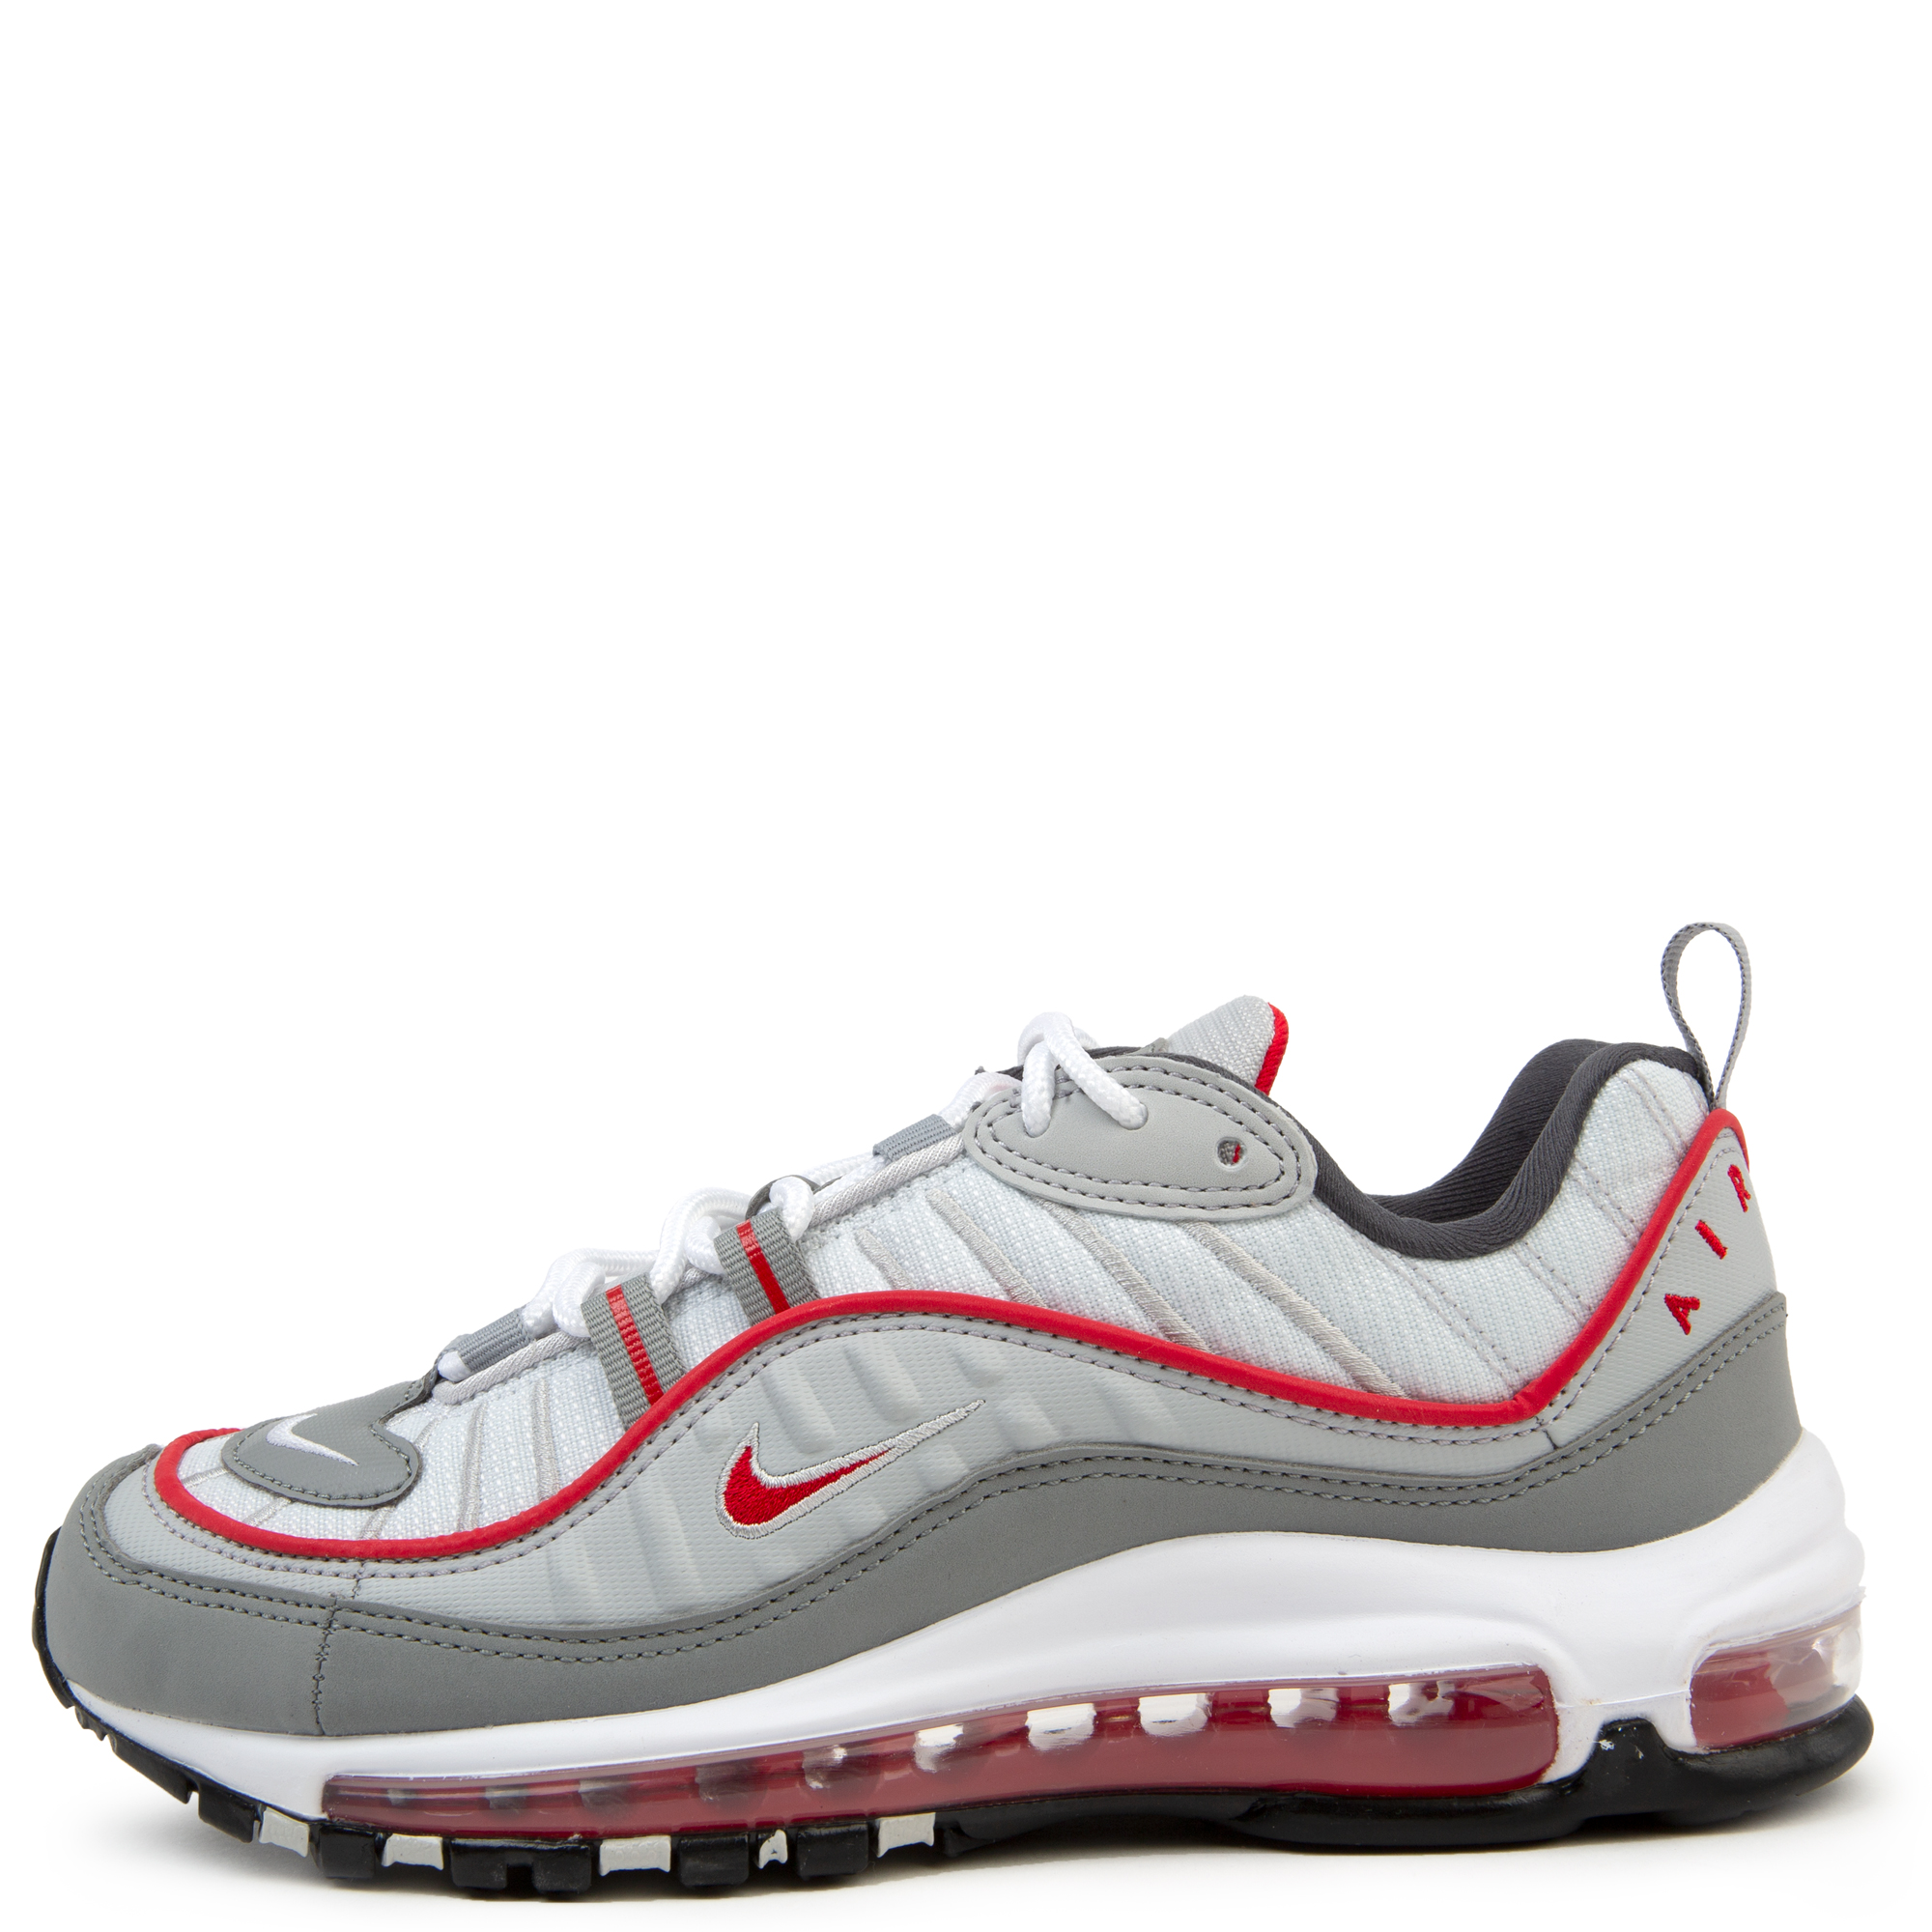 white and grey air max 98